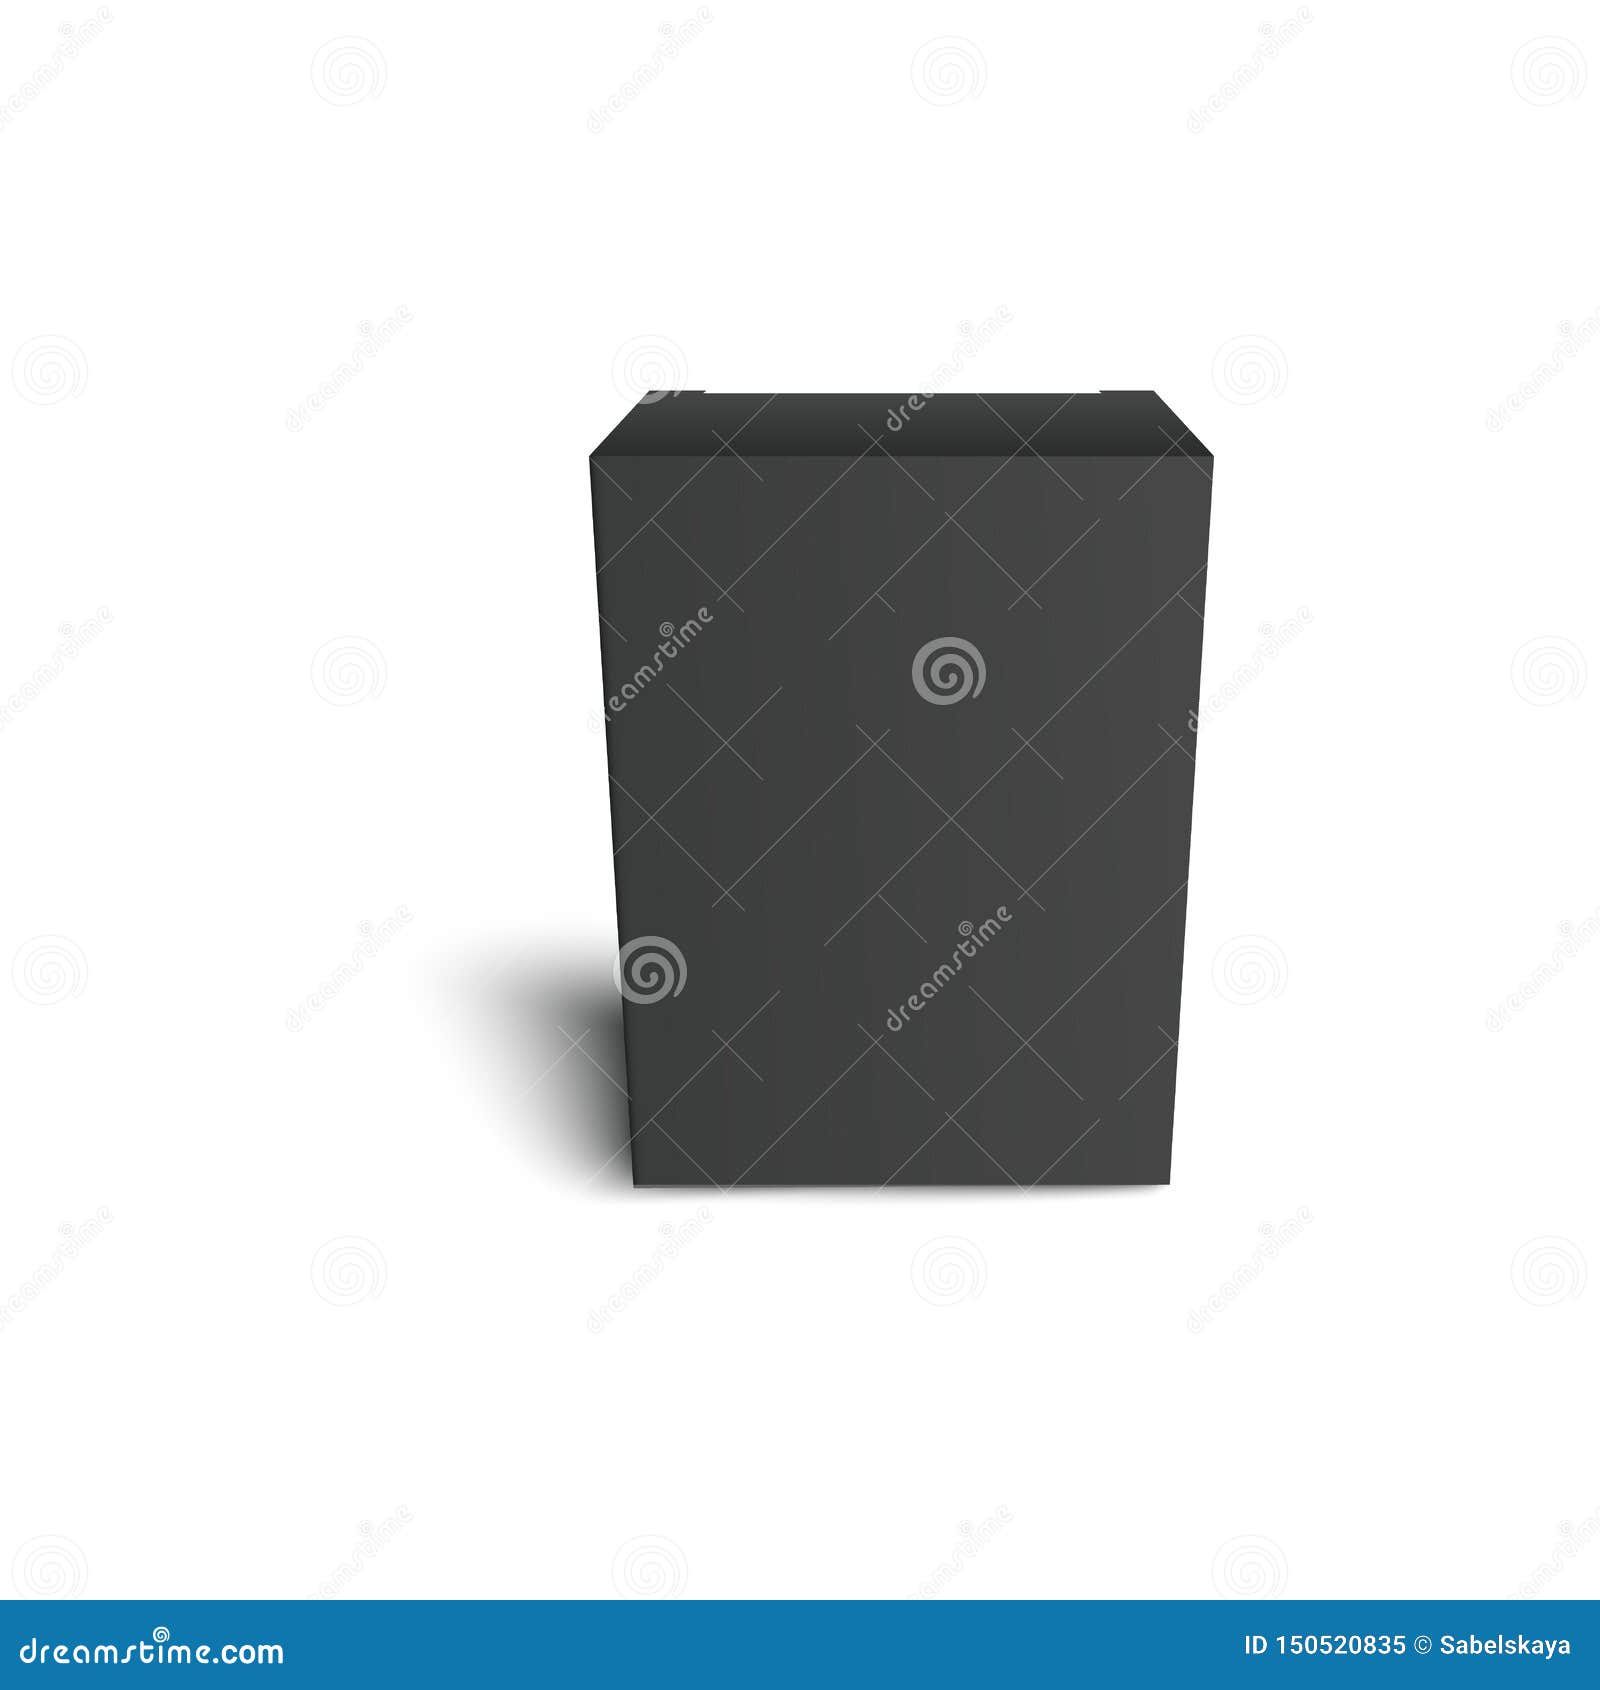 Download Mockup Of Clean Black Rectangle Cardboard Box In Front ...